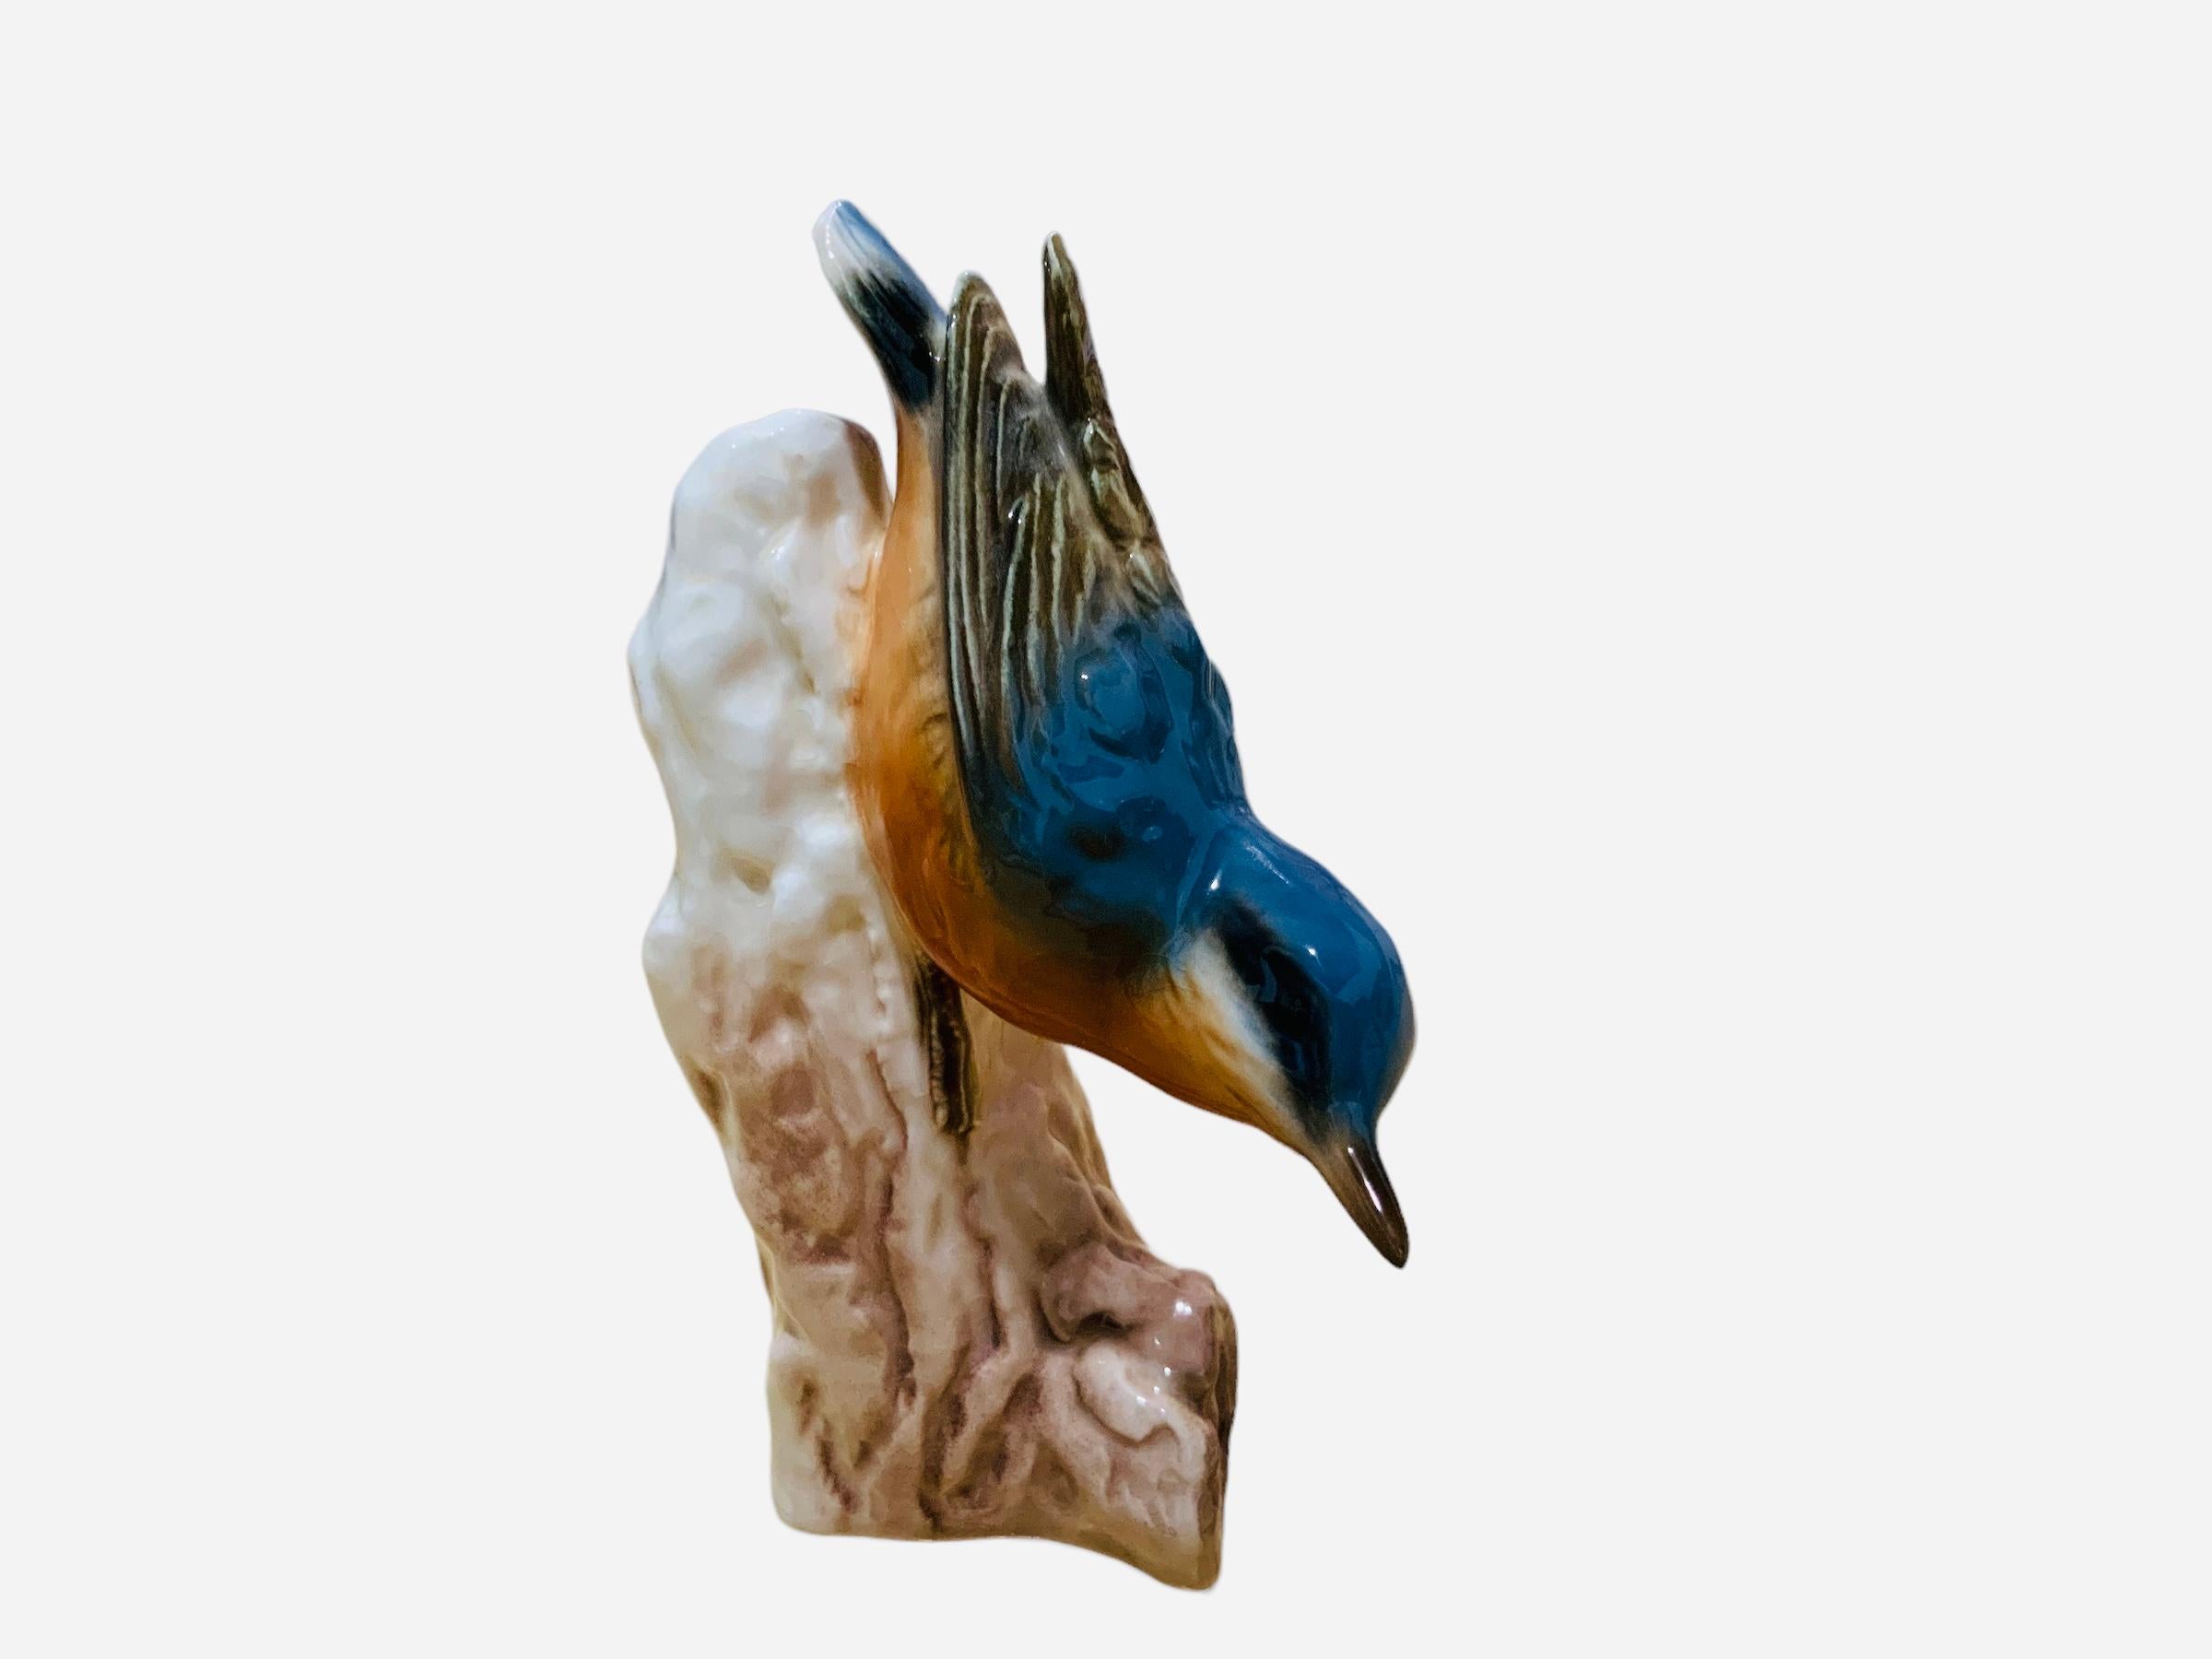 Goebel Porcelain Hand Painted Bird Figurine of a Nuthatch In Good Condition For Sale In Guaynabo, PR